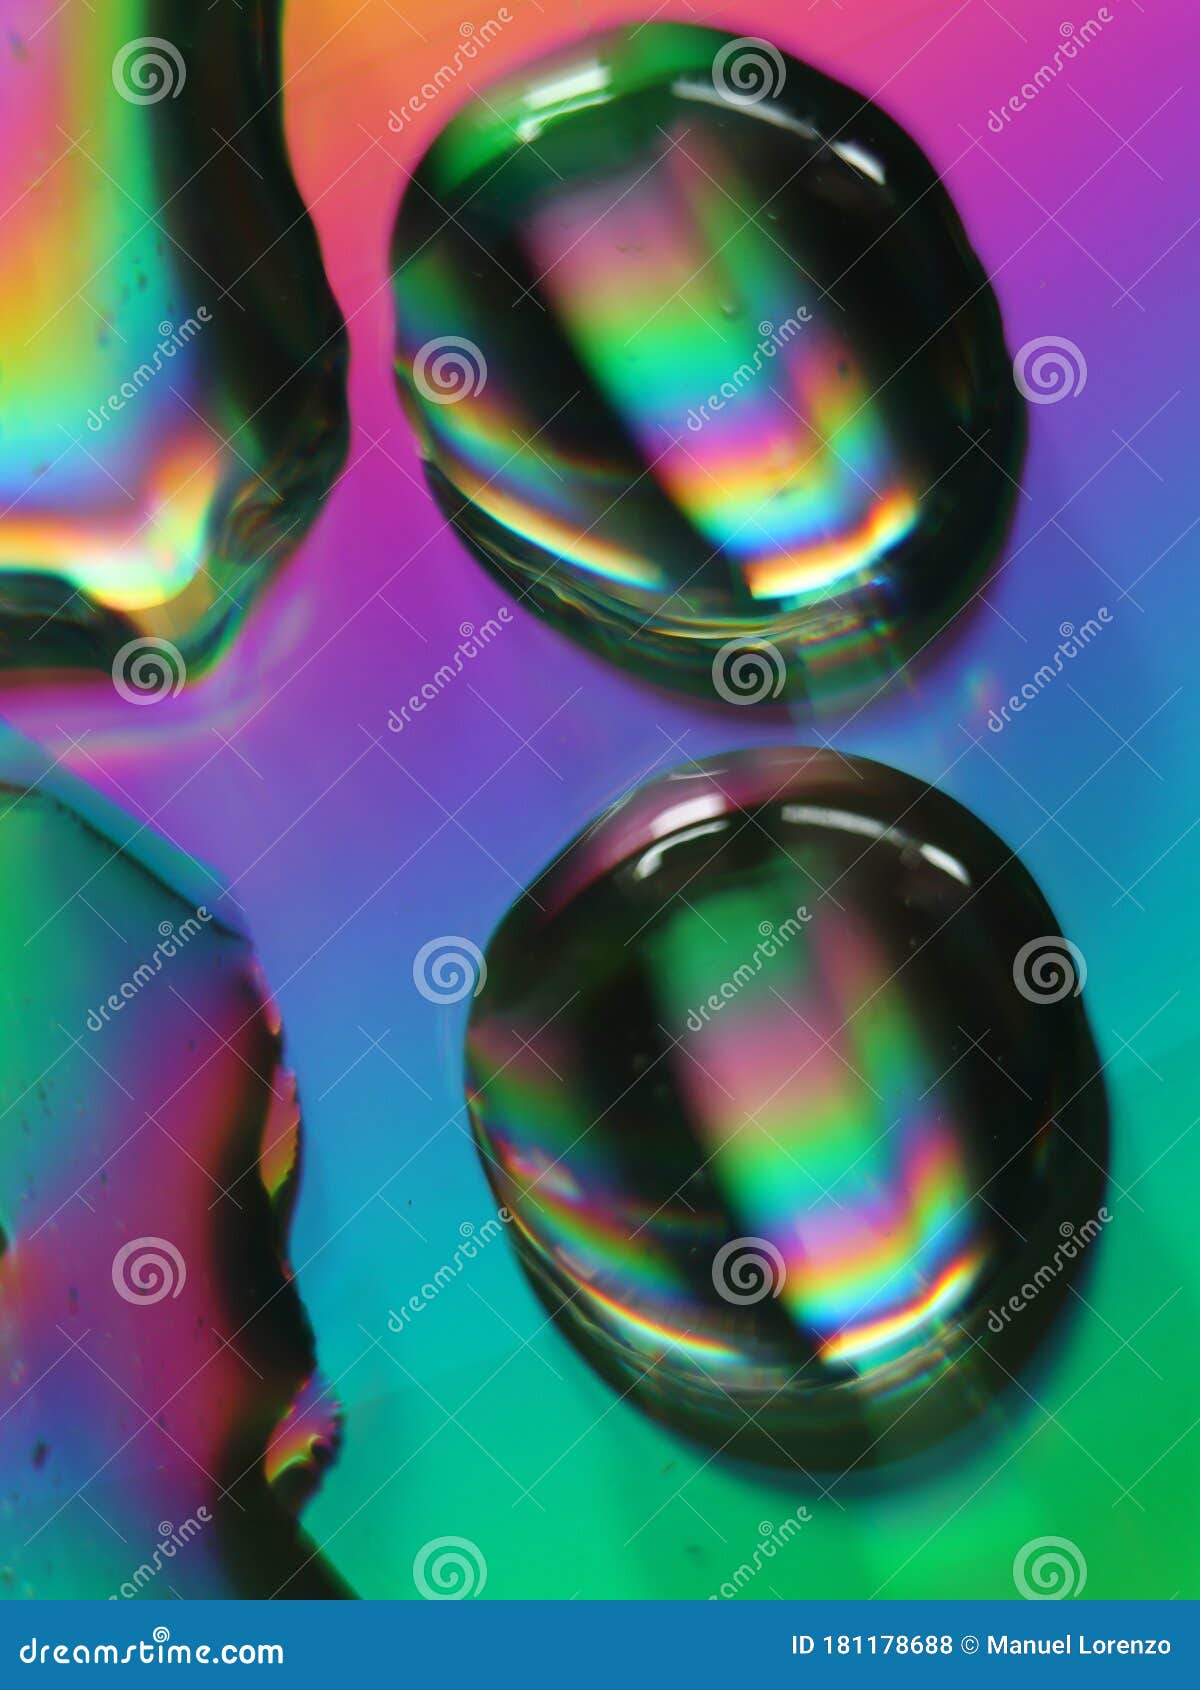 abstract colors rainbow drops reflexes macro background blur